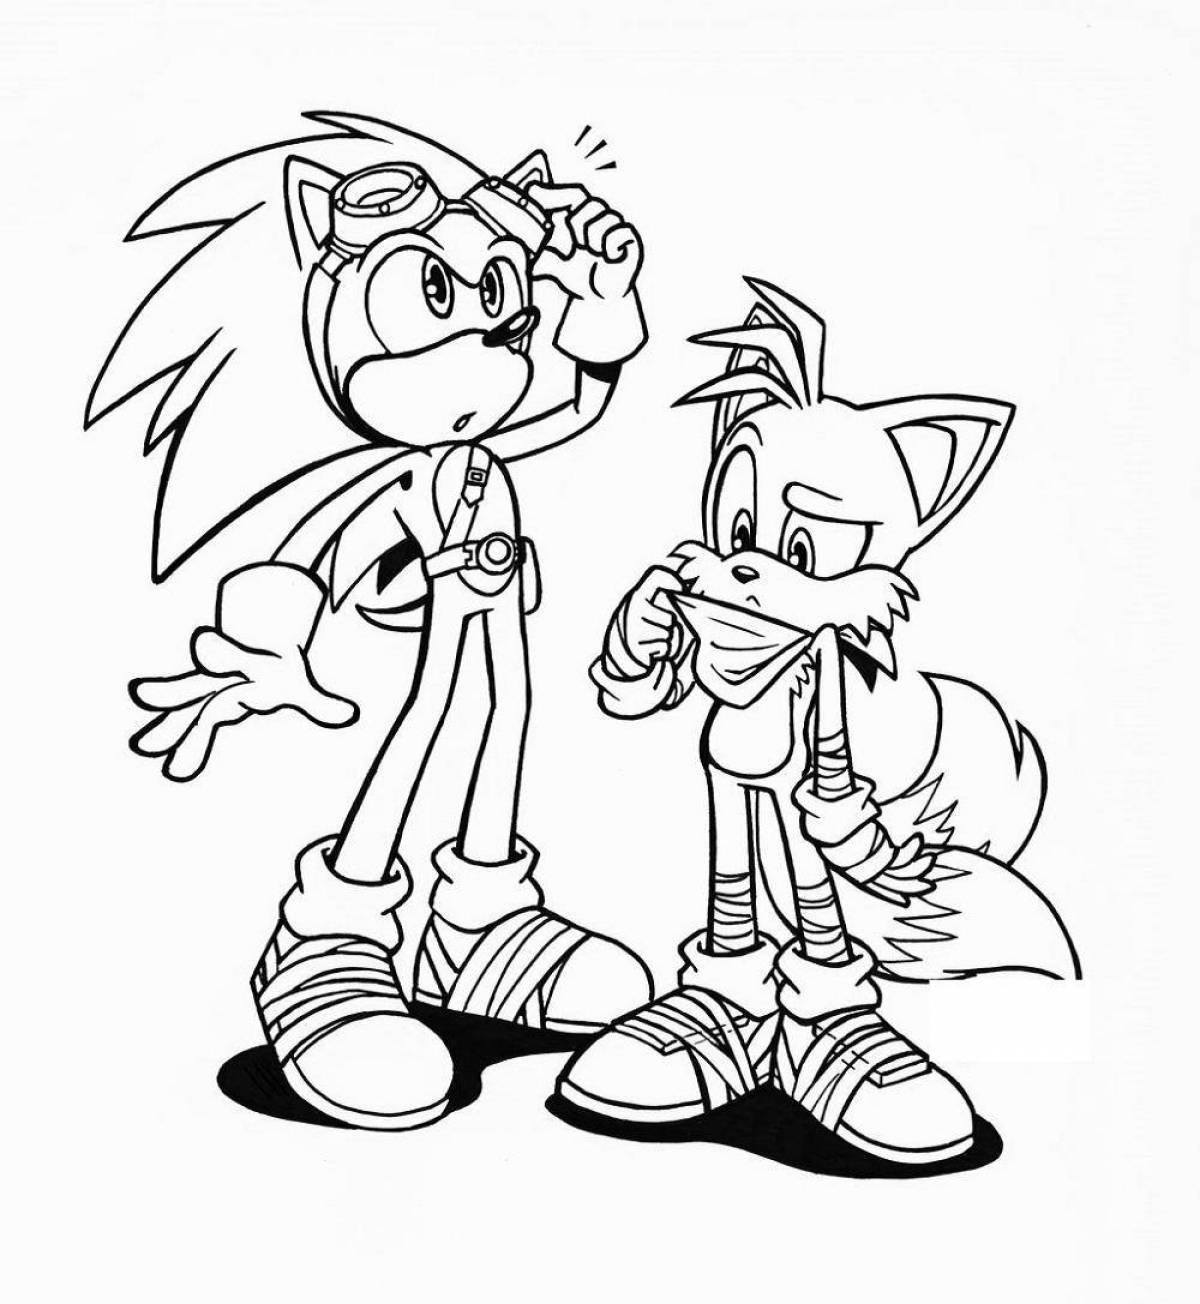 Colorful sonic tails and knuckles coloring book